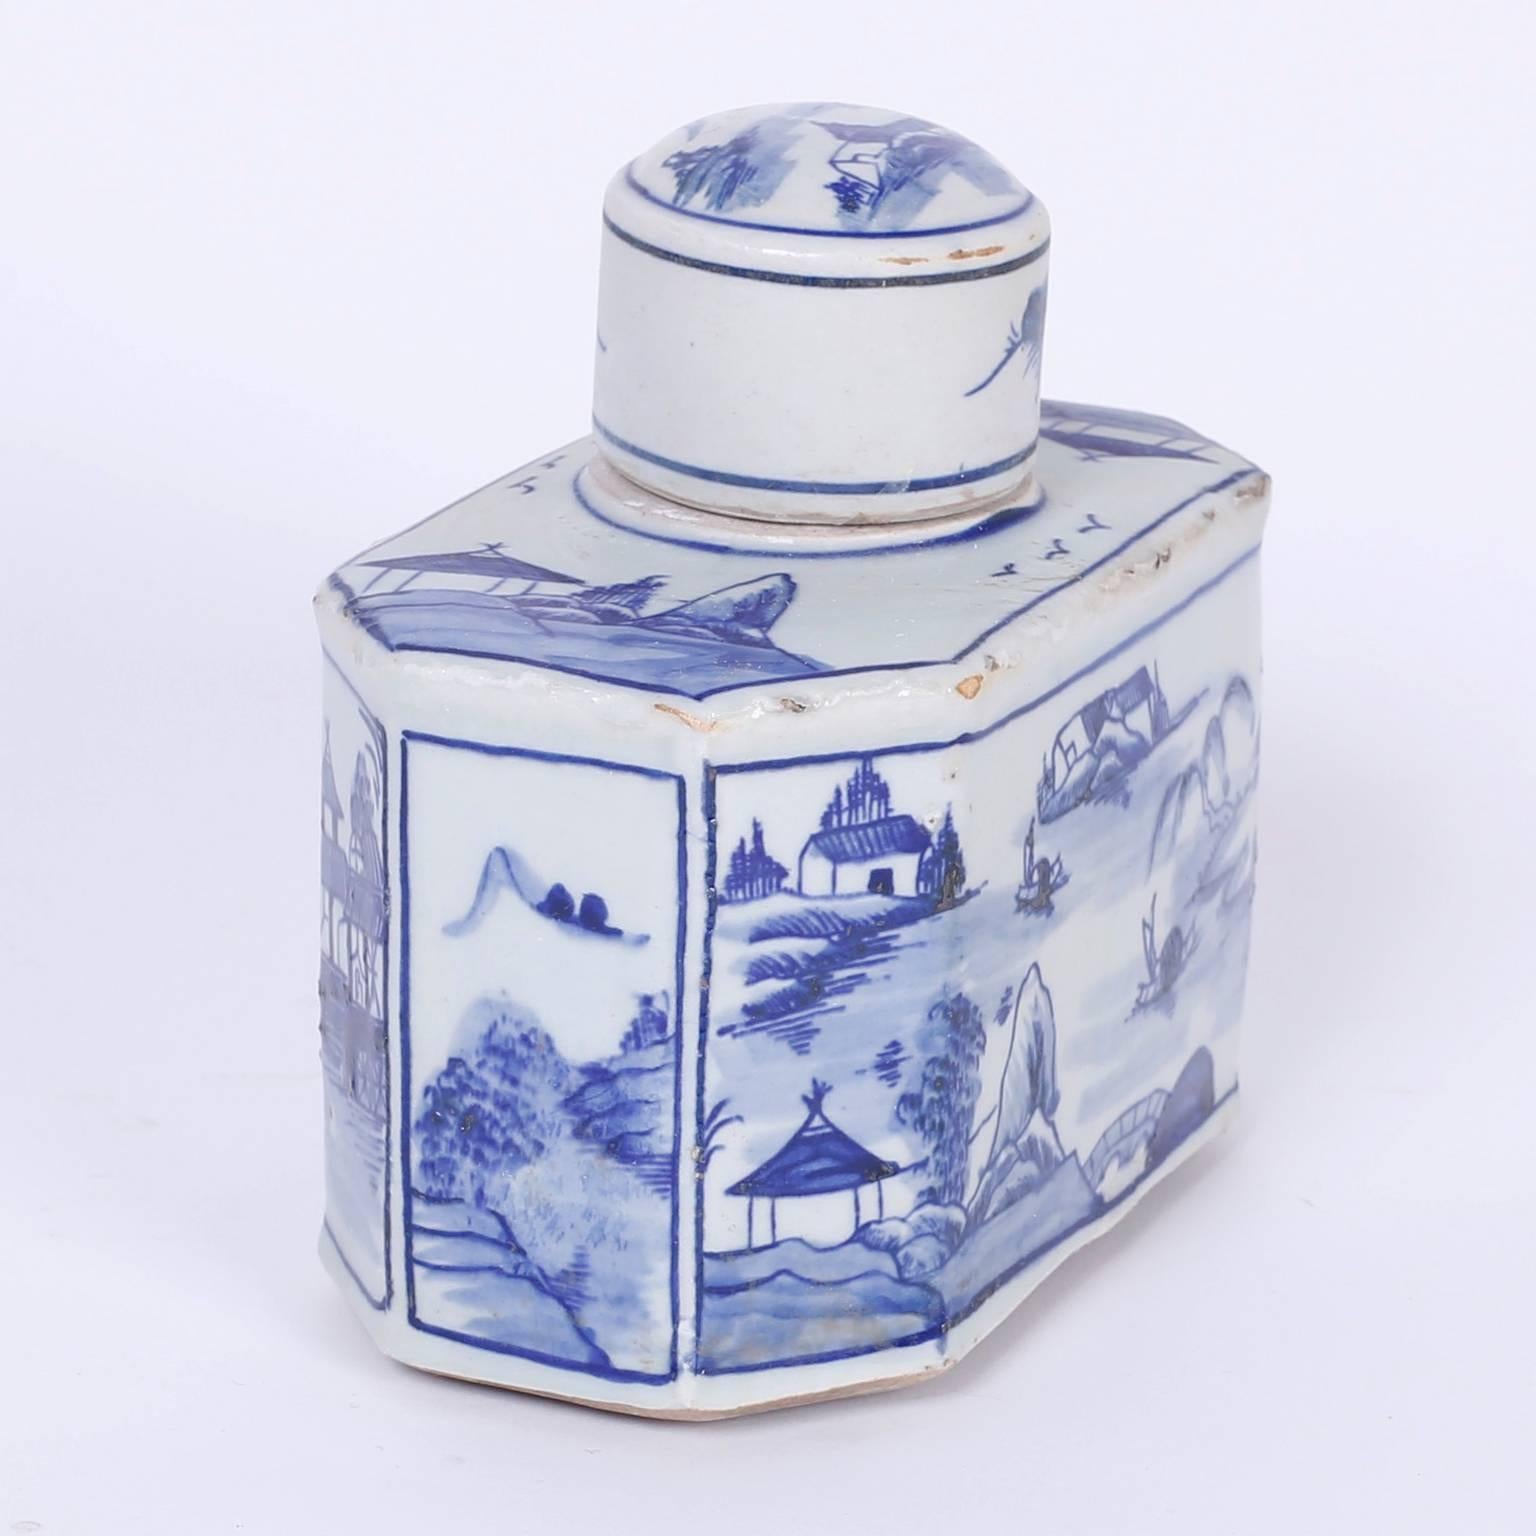 Chinese Export Pair of Blue and White Porcelain Tea Containers